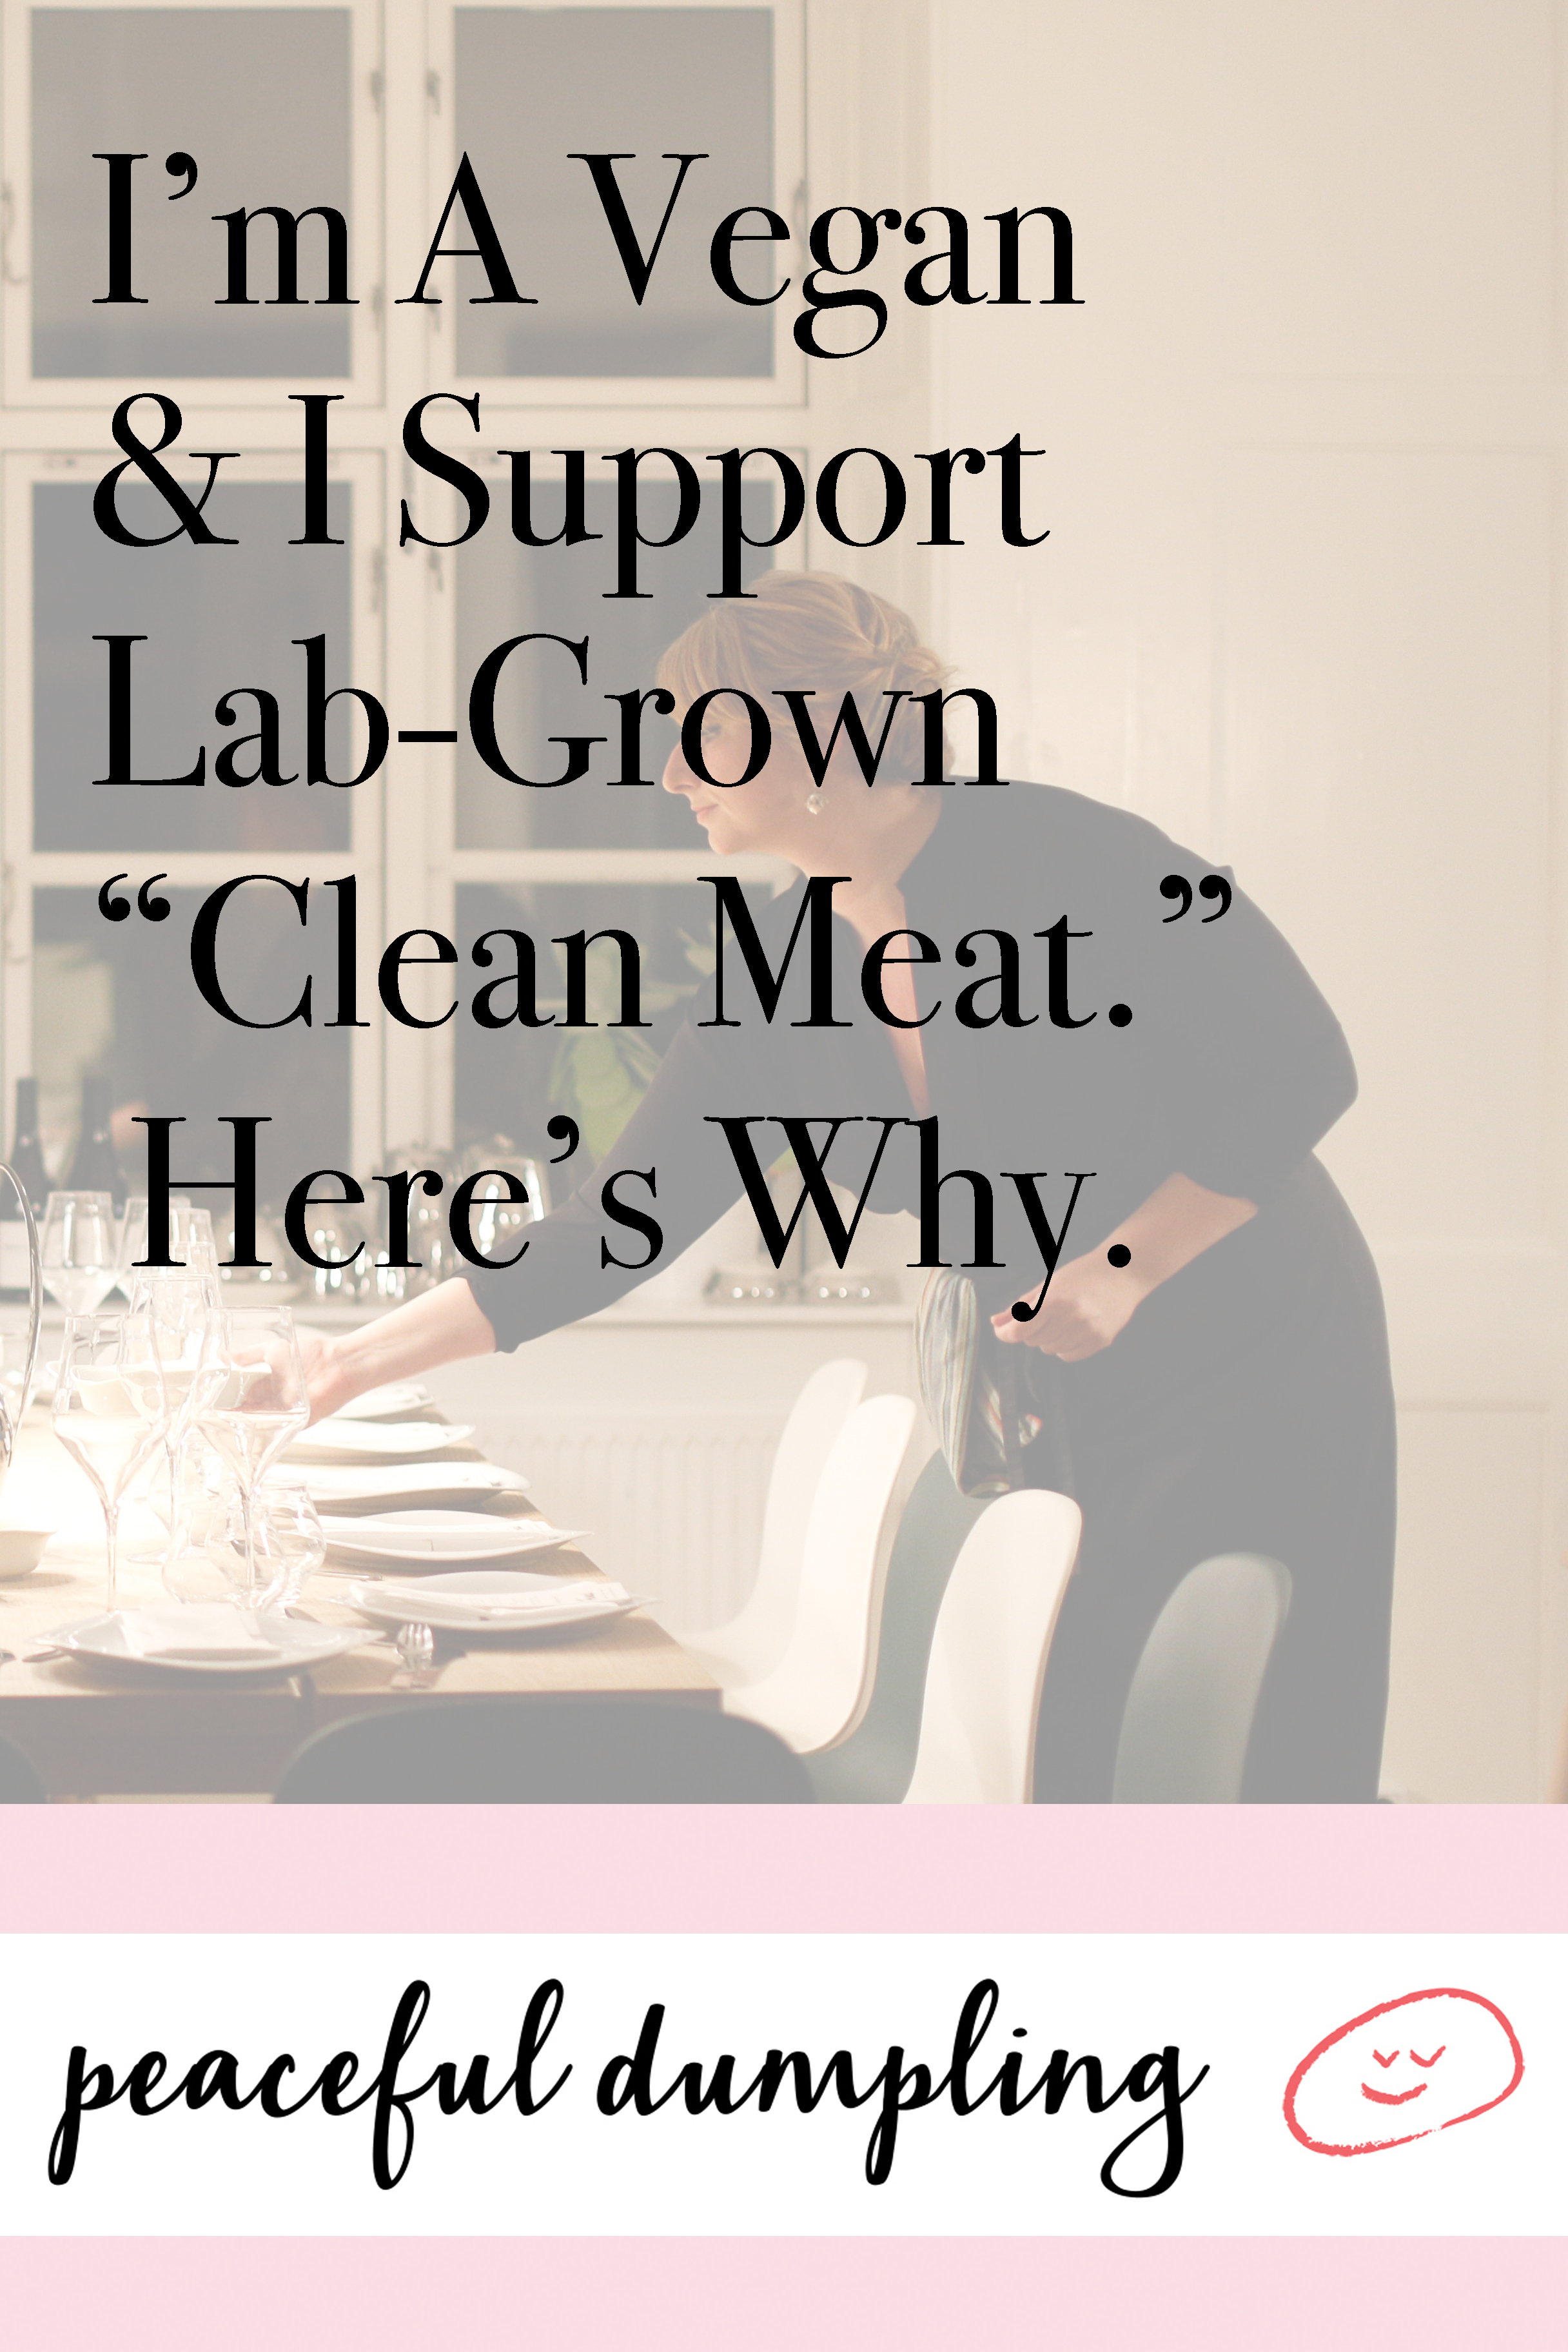 I’m A Vegan & I Support Lab-Grown “Clean Meat.” Here’s Why.